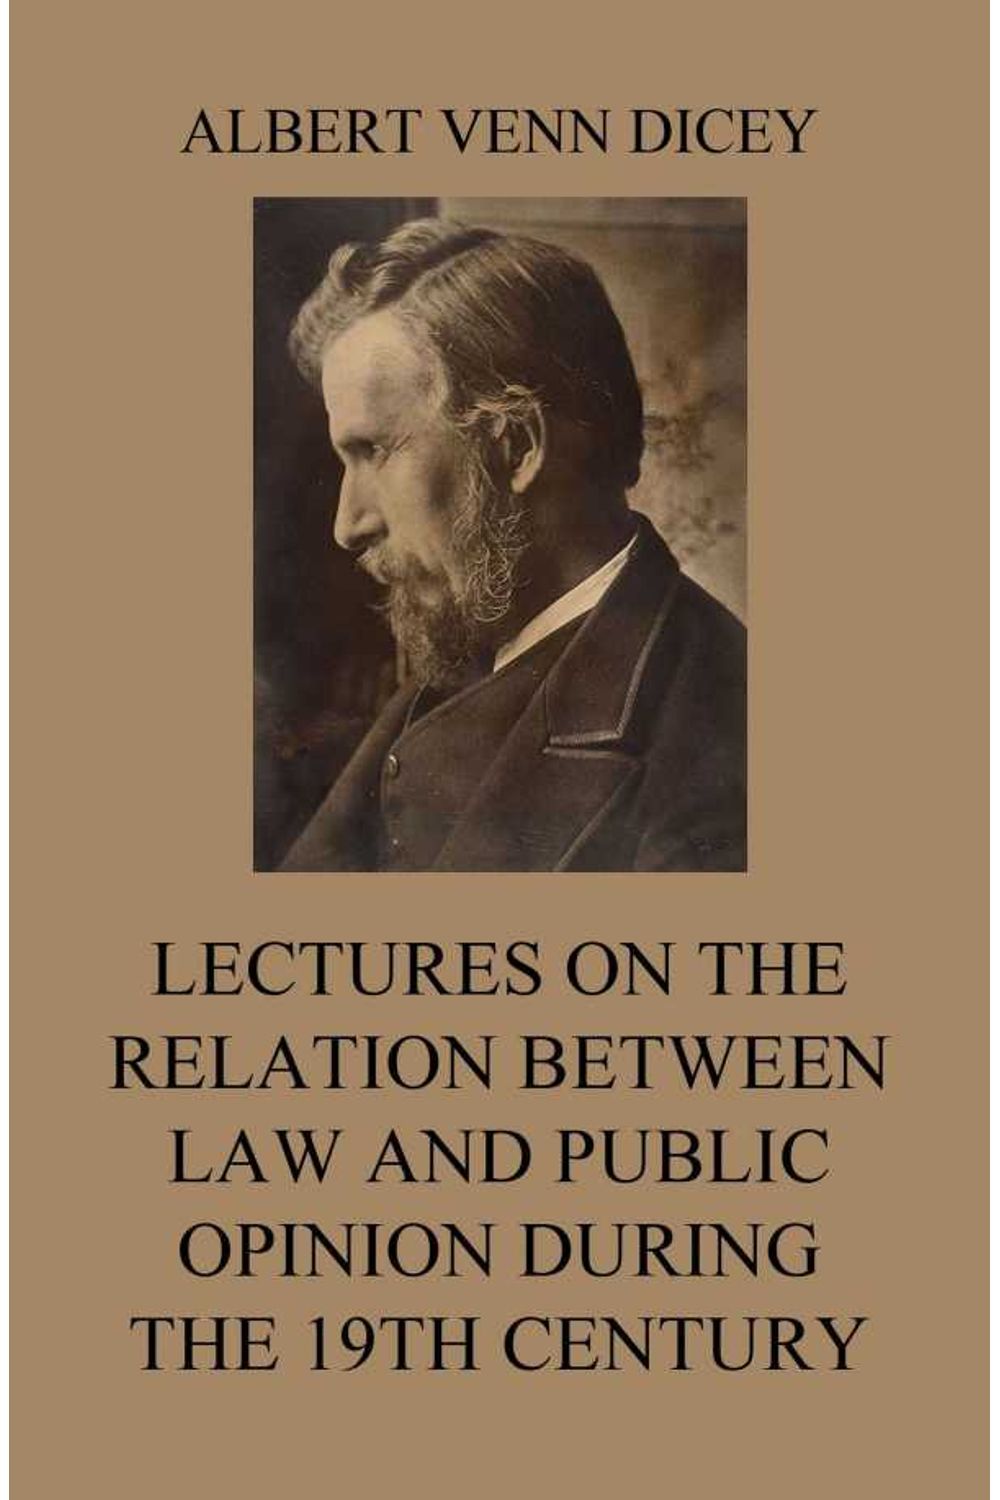 bw-lectures-on-the-relation-between-law-and-public-opinion-during-the-19th-century-jazzybee-verlag-9783849653408